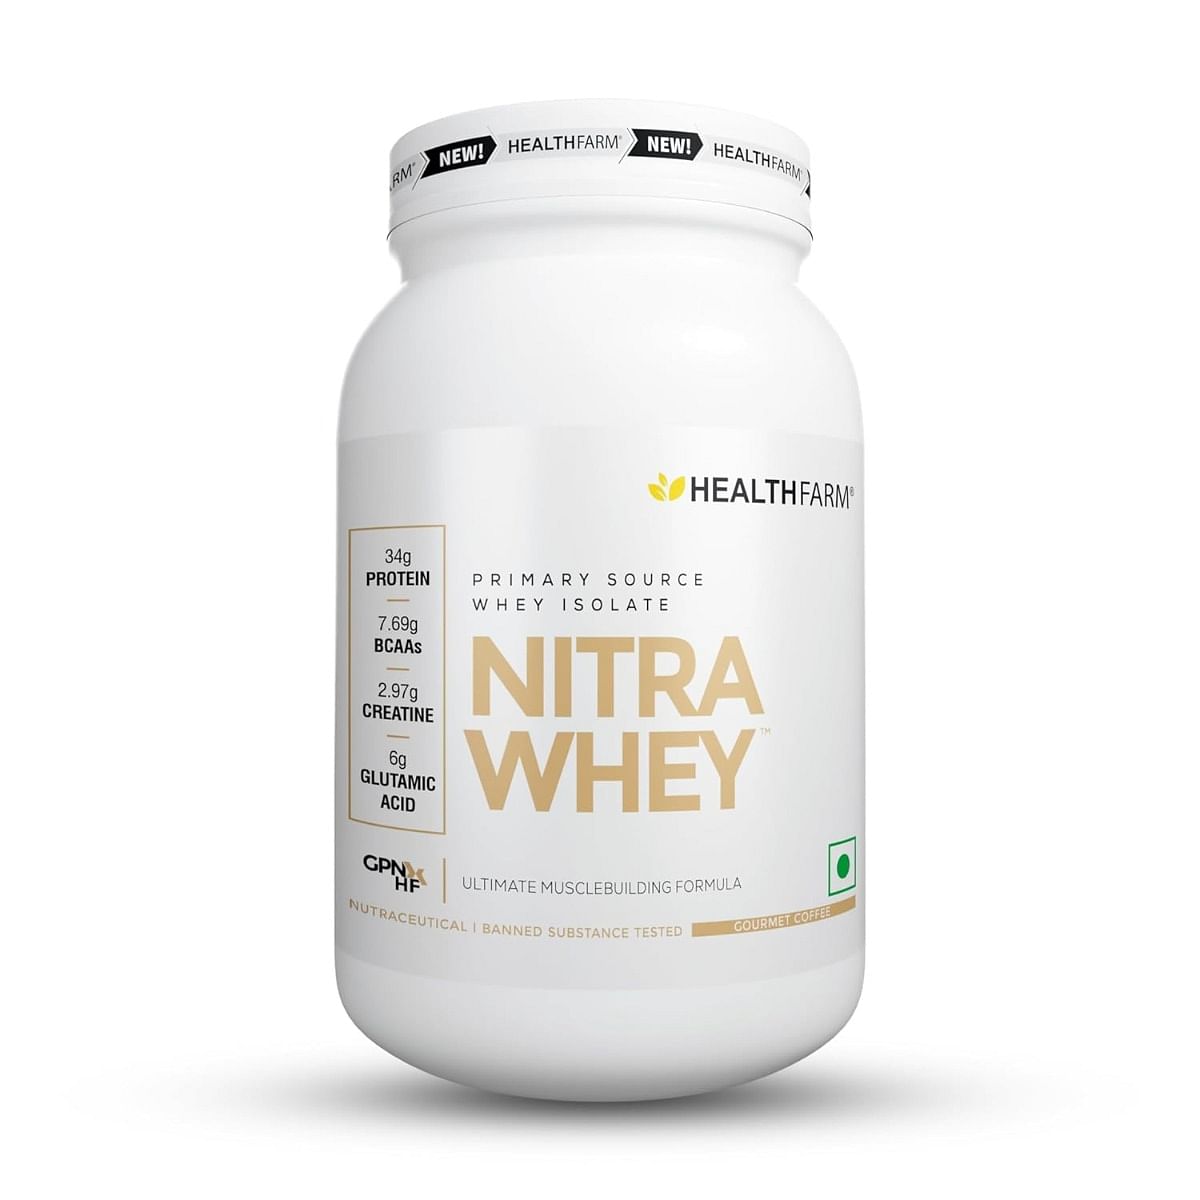 

Healthfarm Nitra Whey Protein | 34g Protein Per Serving & 3g Added Creatine | Blend of Isolate & Concentrate Protein (Gourmet Coffee, 1kg)